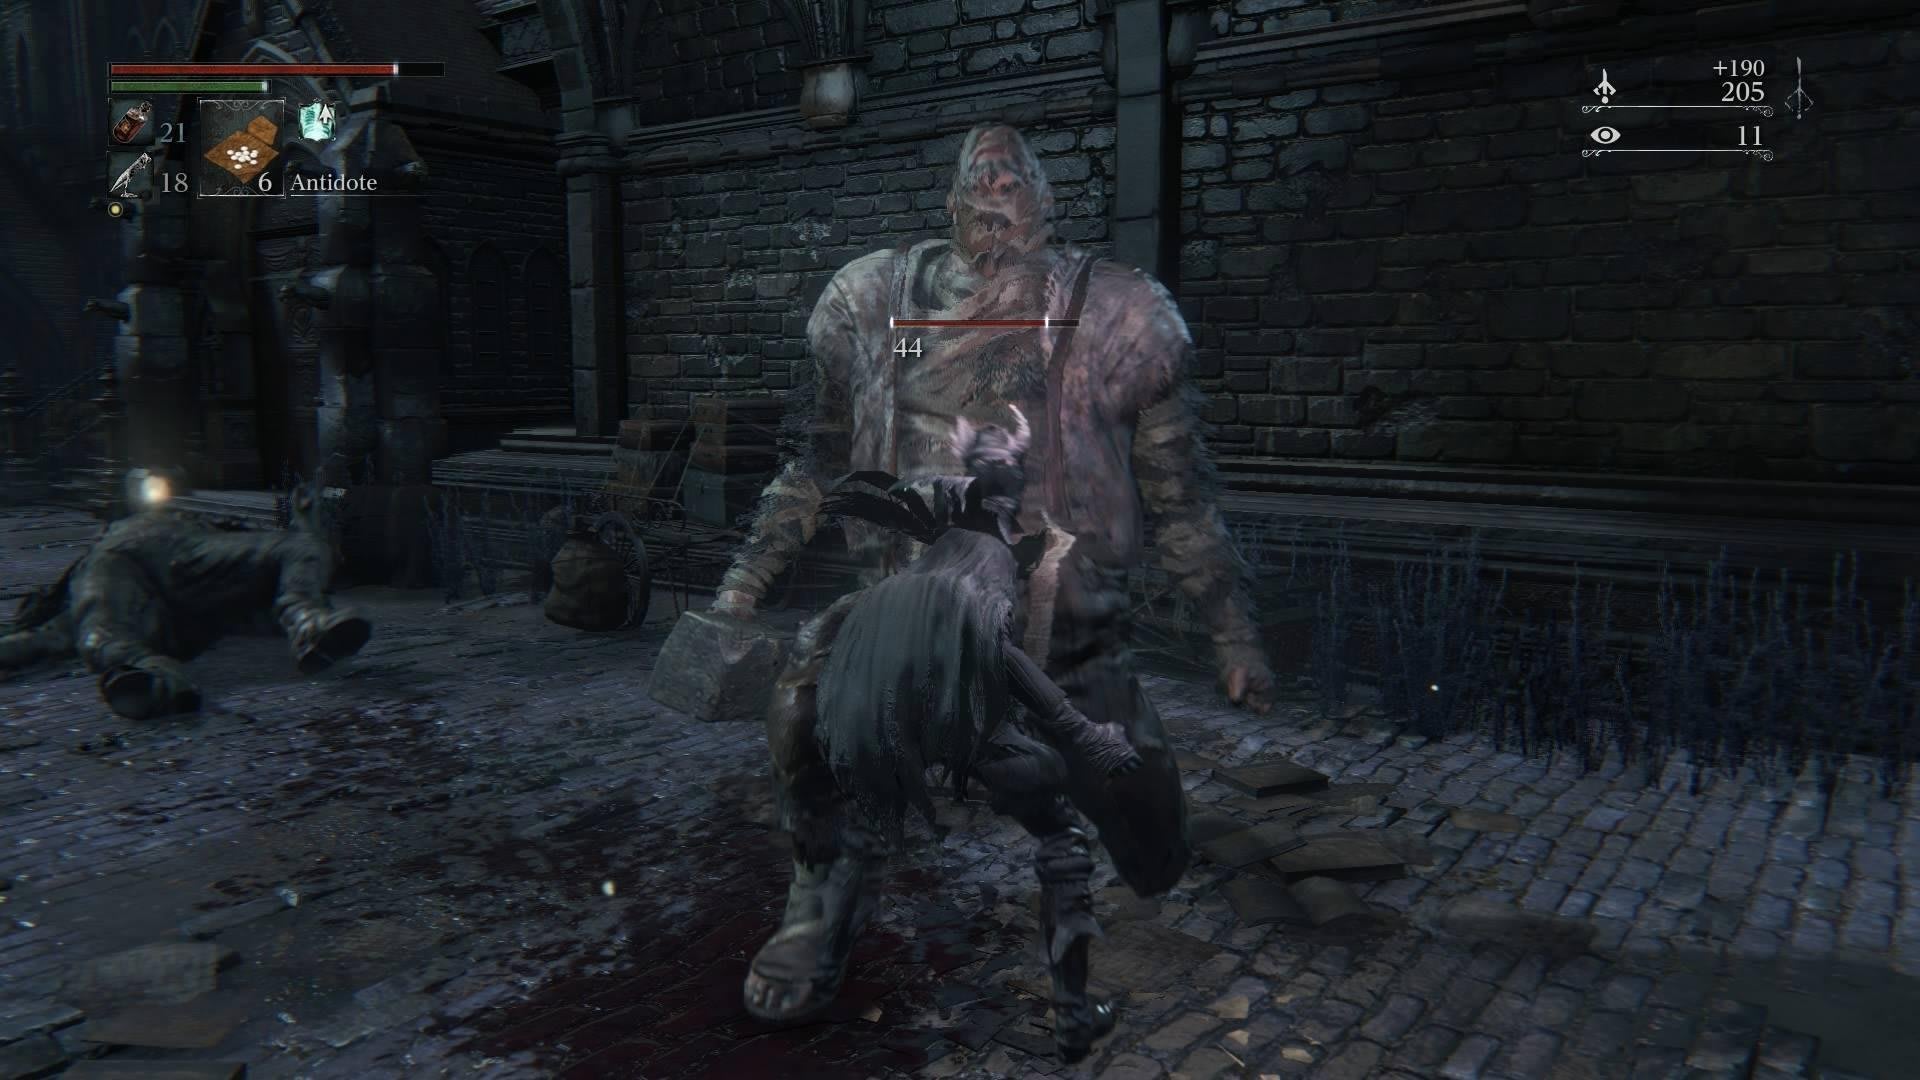 How do I beat this enemy? I have no weapons and I'm scared to fight it. : r/ bloodborne